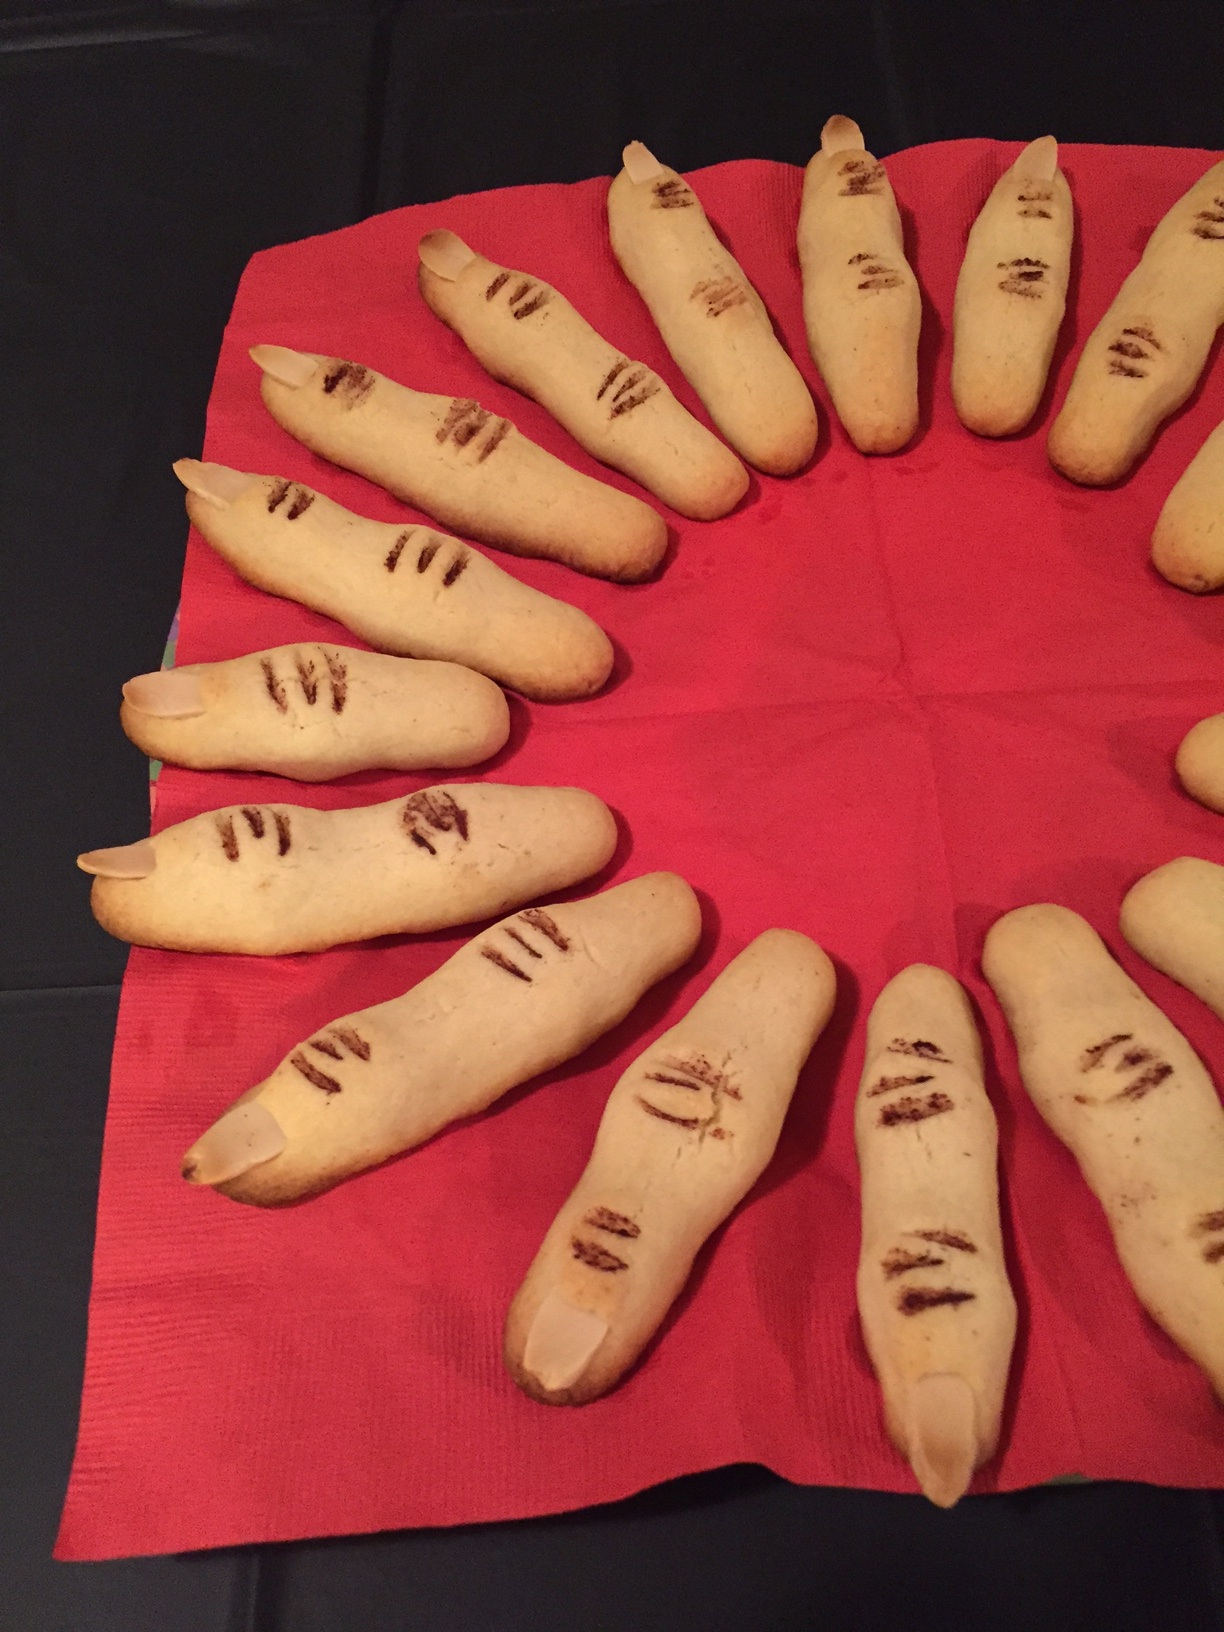 Thumbnail for Scary Halloween “Finger” Cookies – Low Carb & Gluten Free!